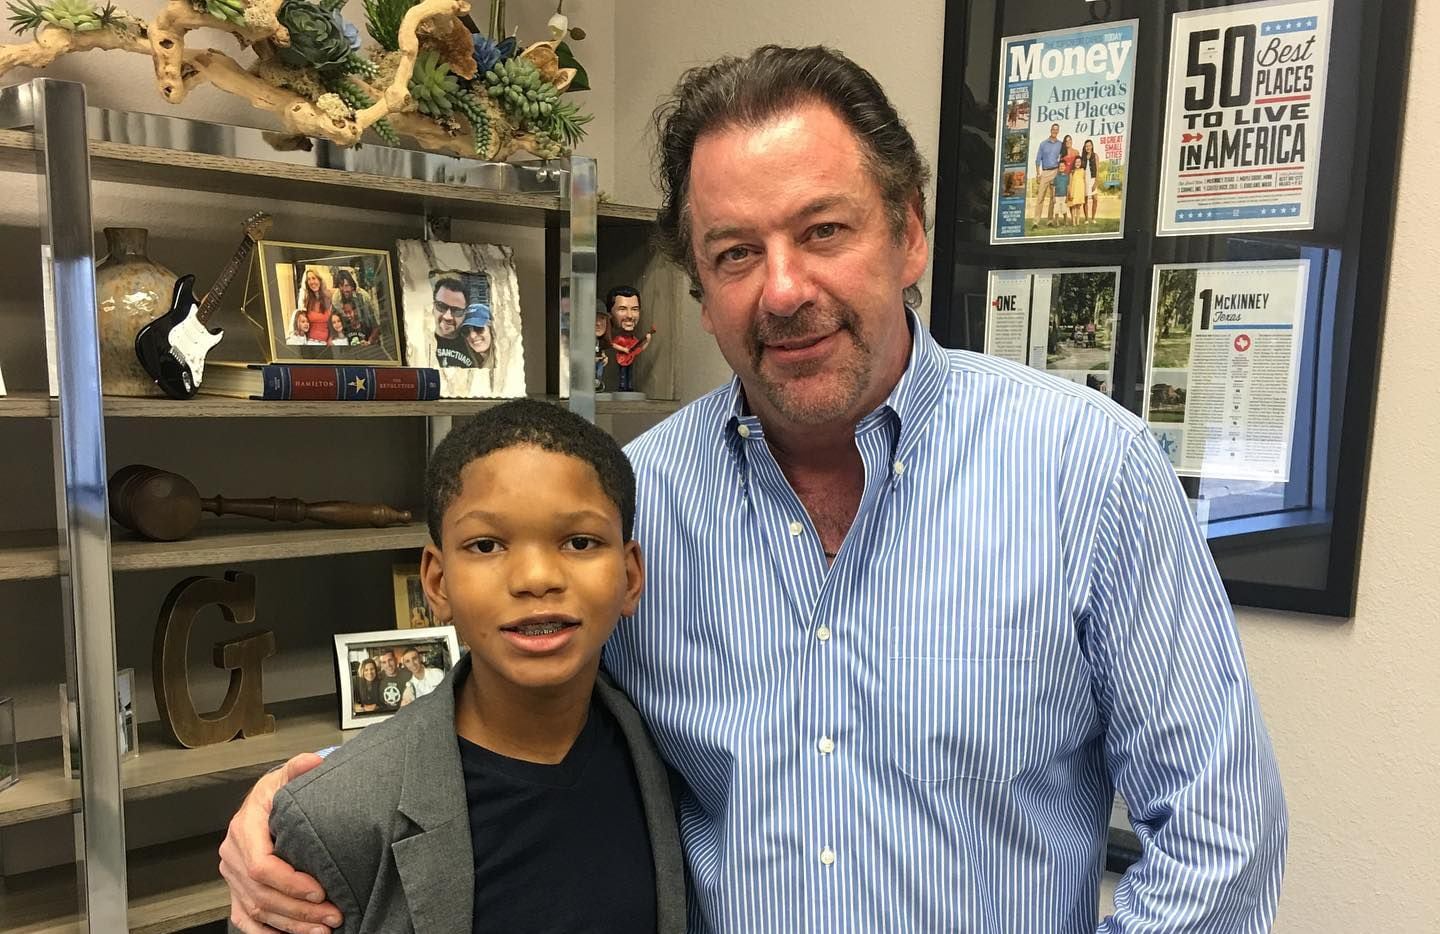 Fourteen-year-old Jaxson Turner and McKinney Mayor George Fuller formed a bond that led to an appearance on "The Kelly Clarkson Show."